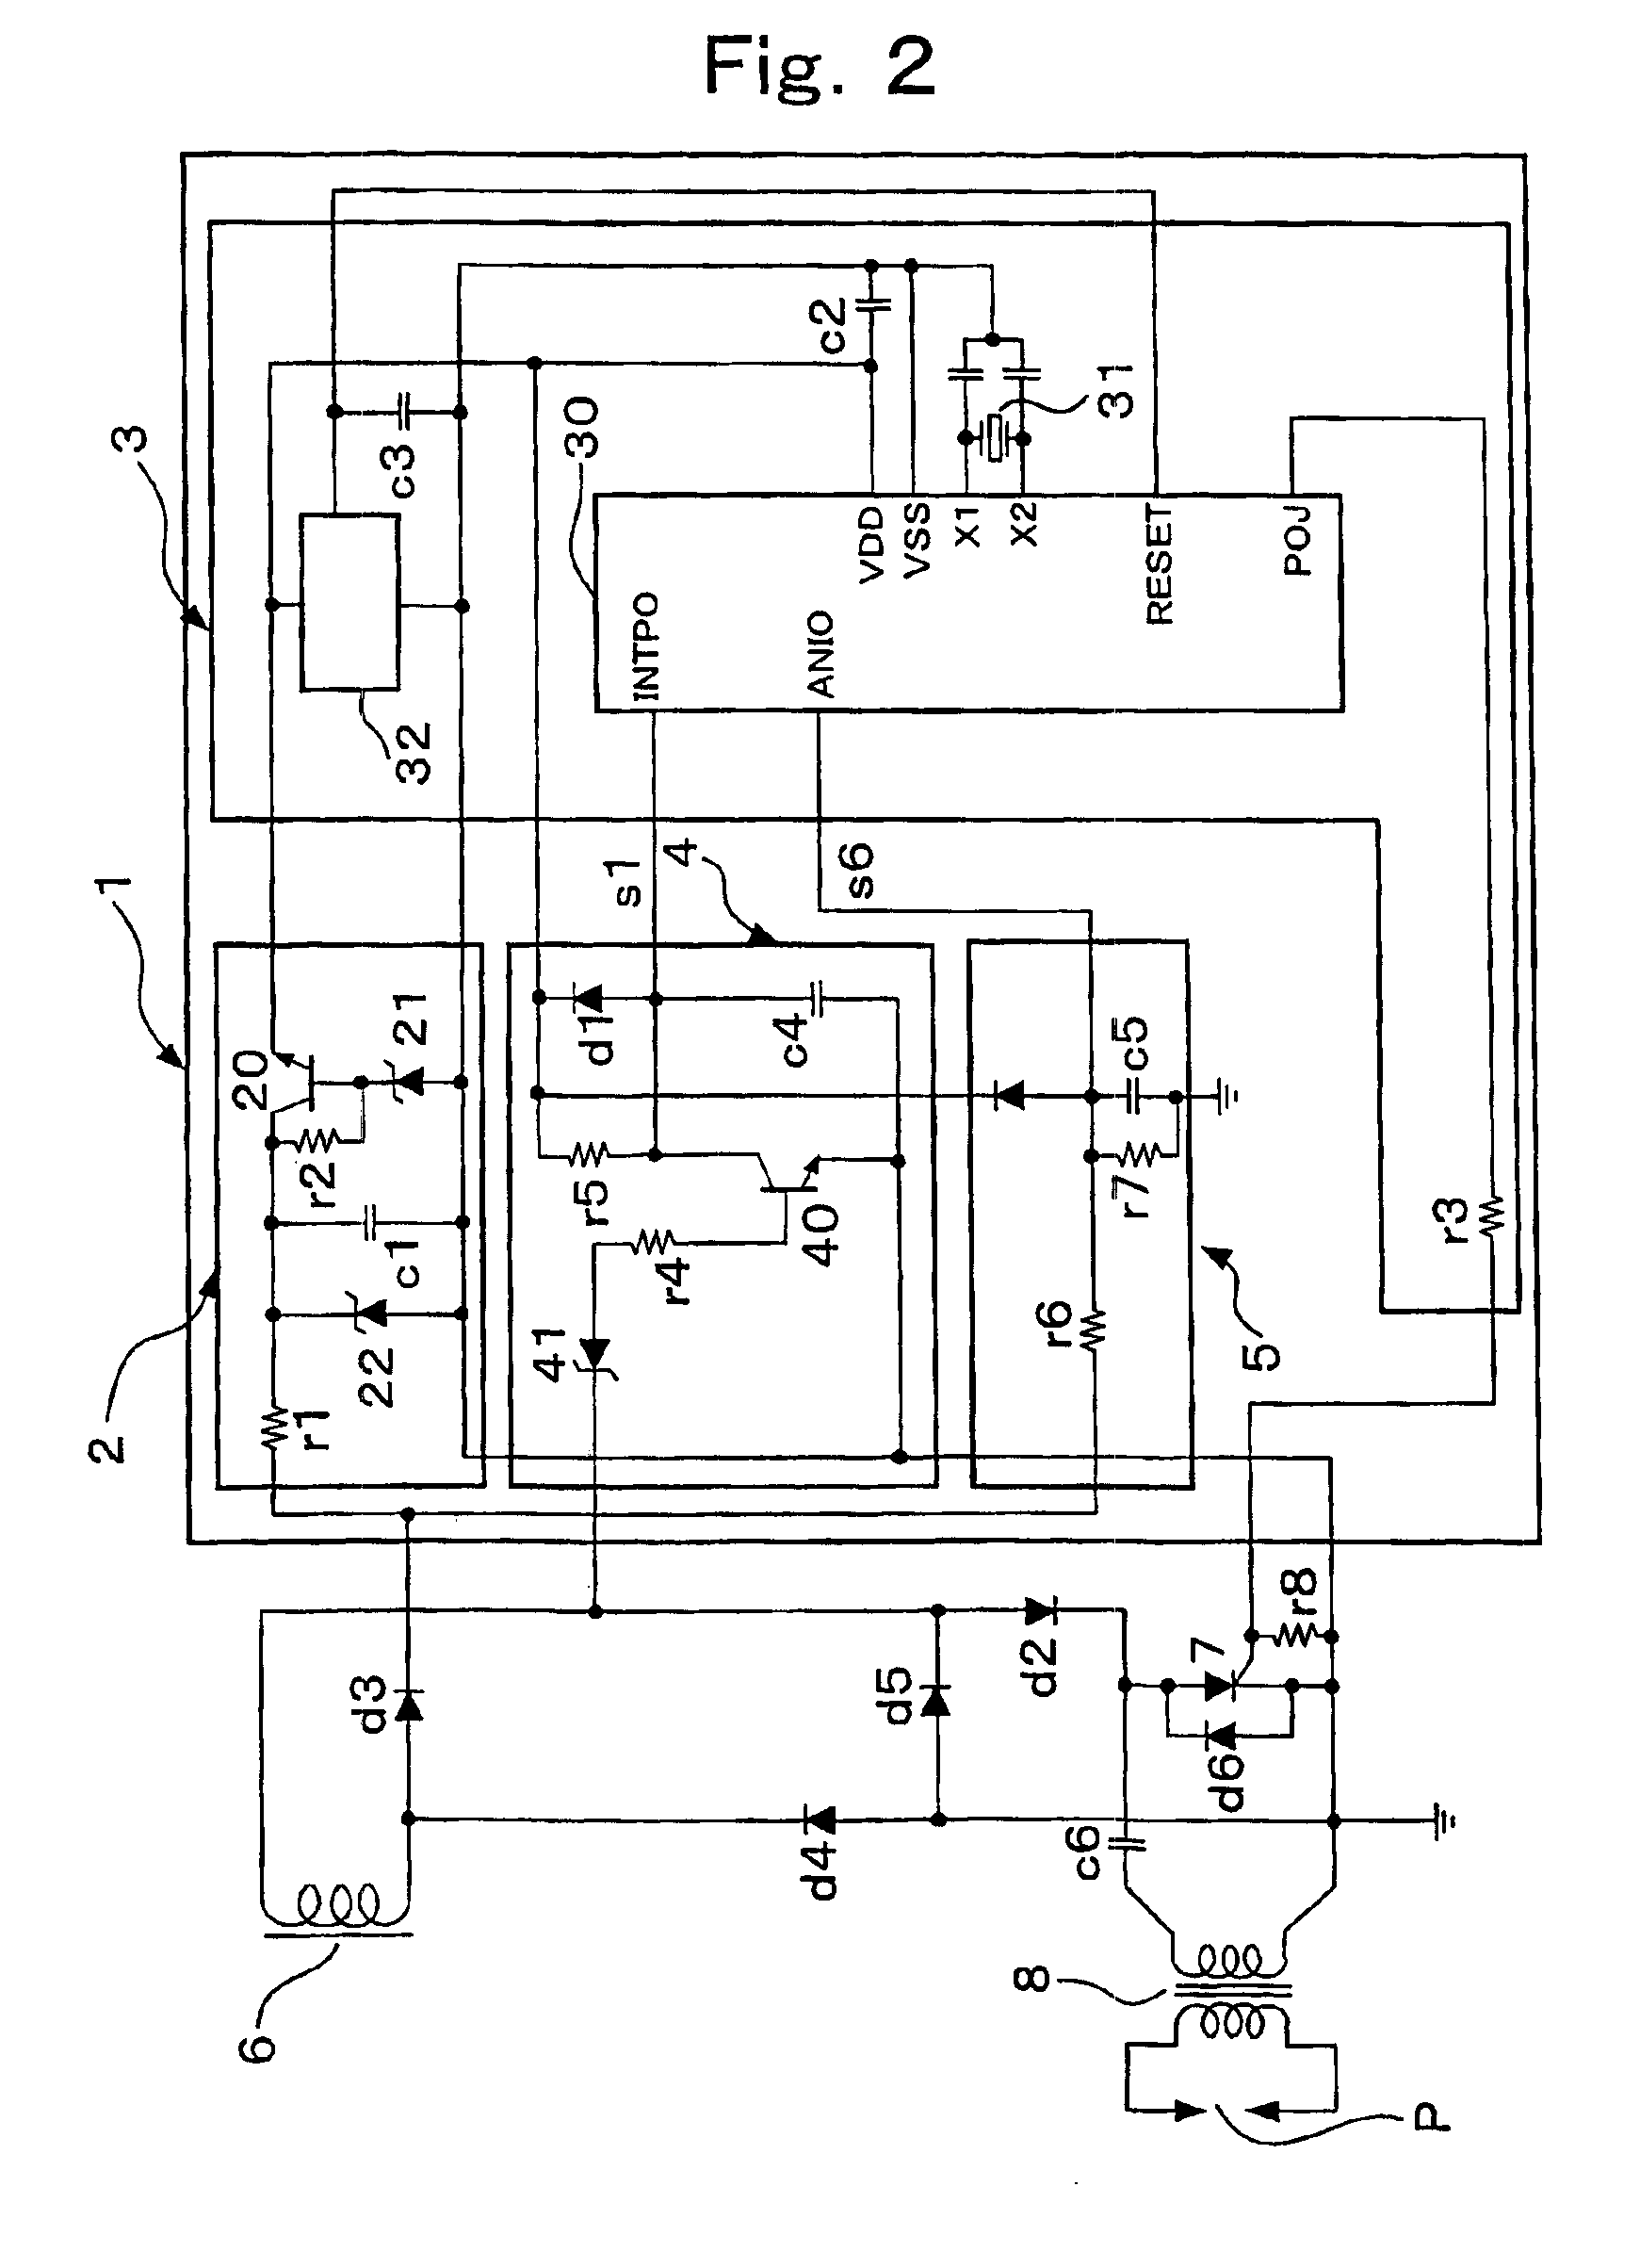 Method and device for controlling ignition timing of ignition device for internal combustion engine